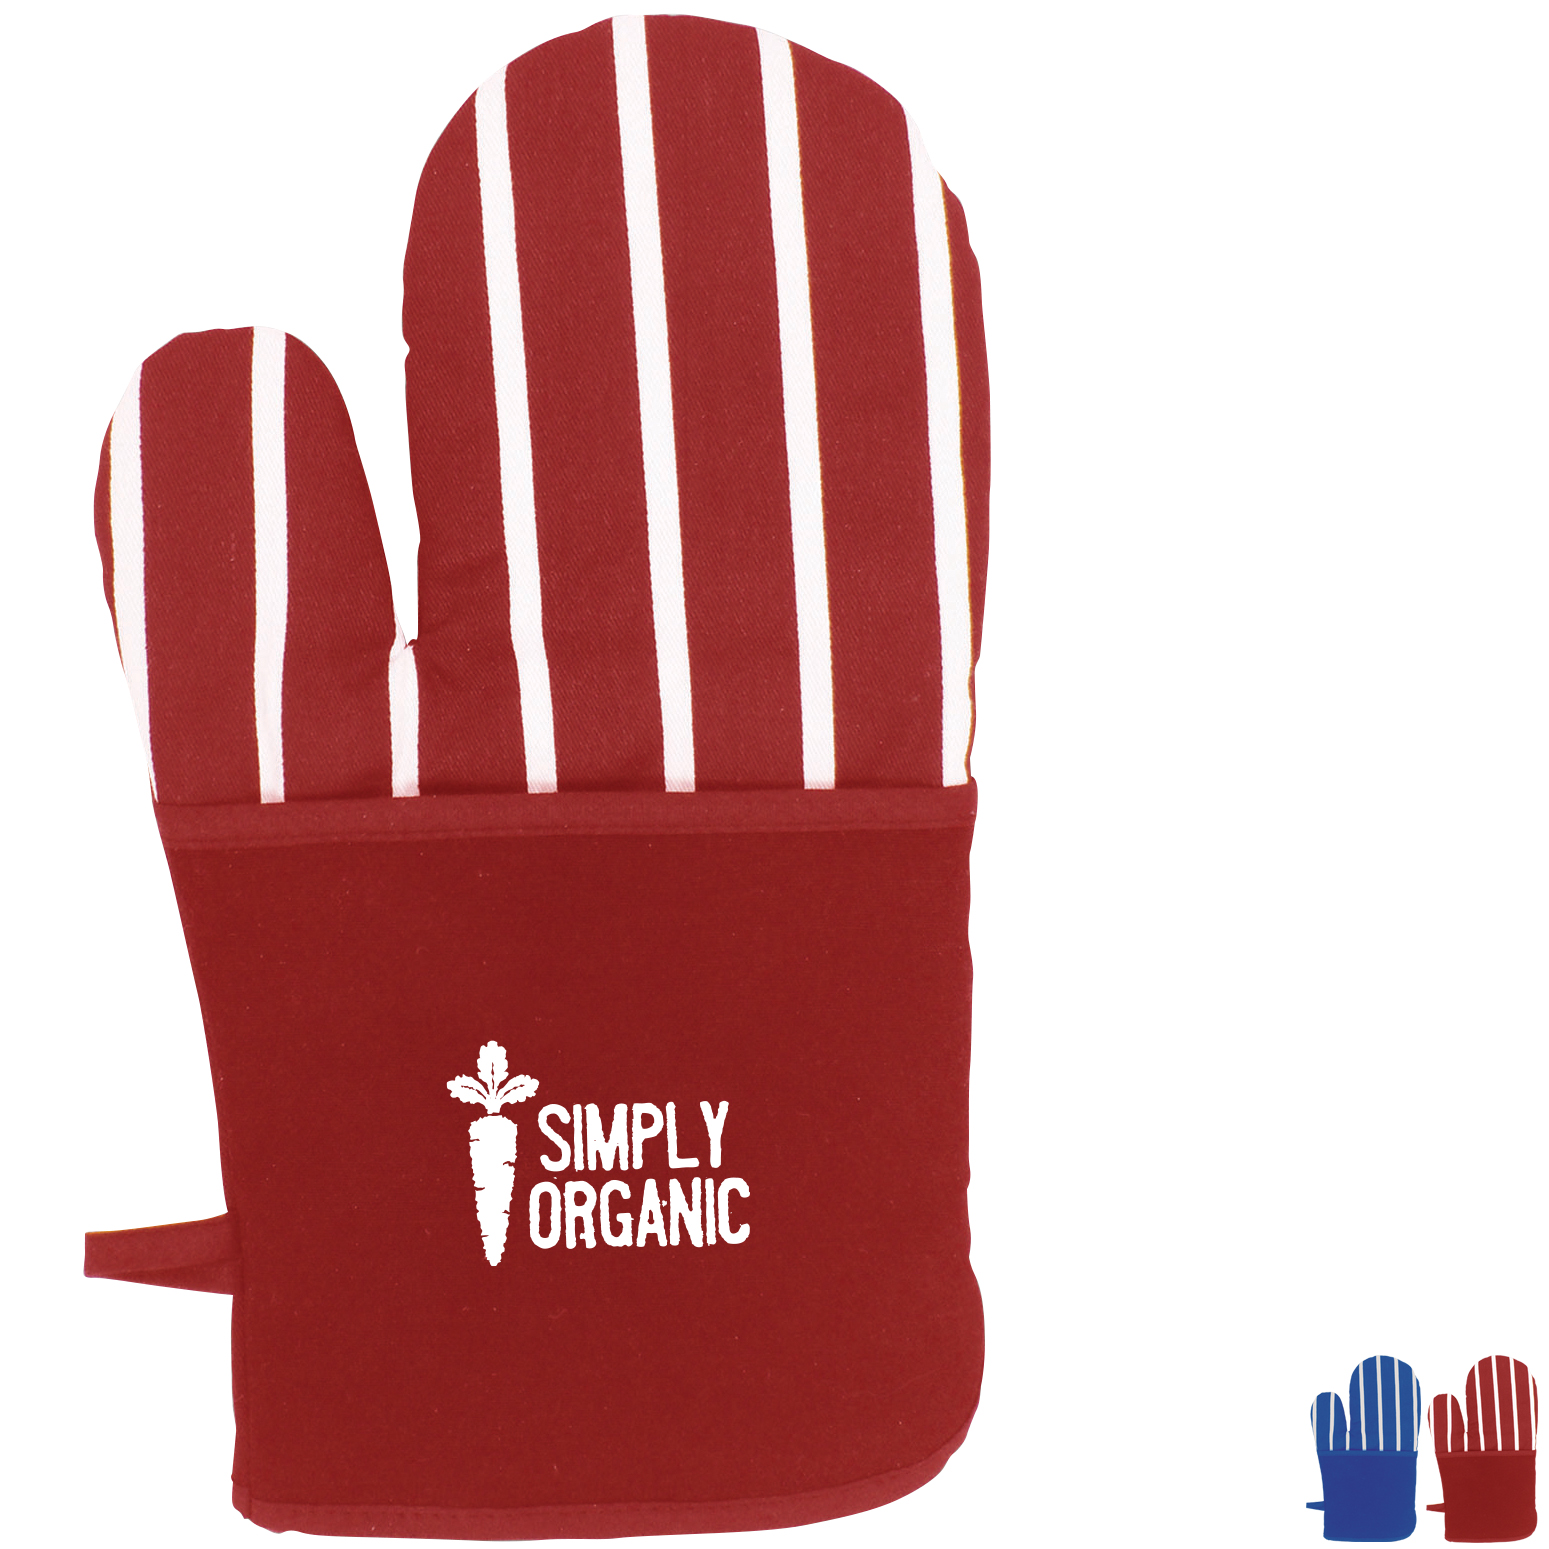 Silicone Pot Holders Oven Mitts - SPCF016 - IdeaStage Promotional Products